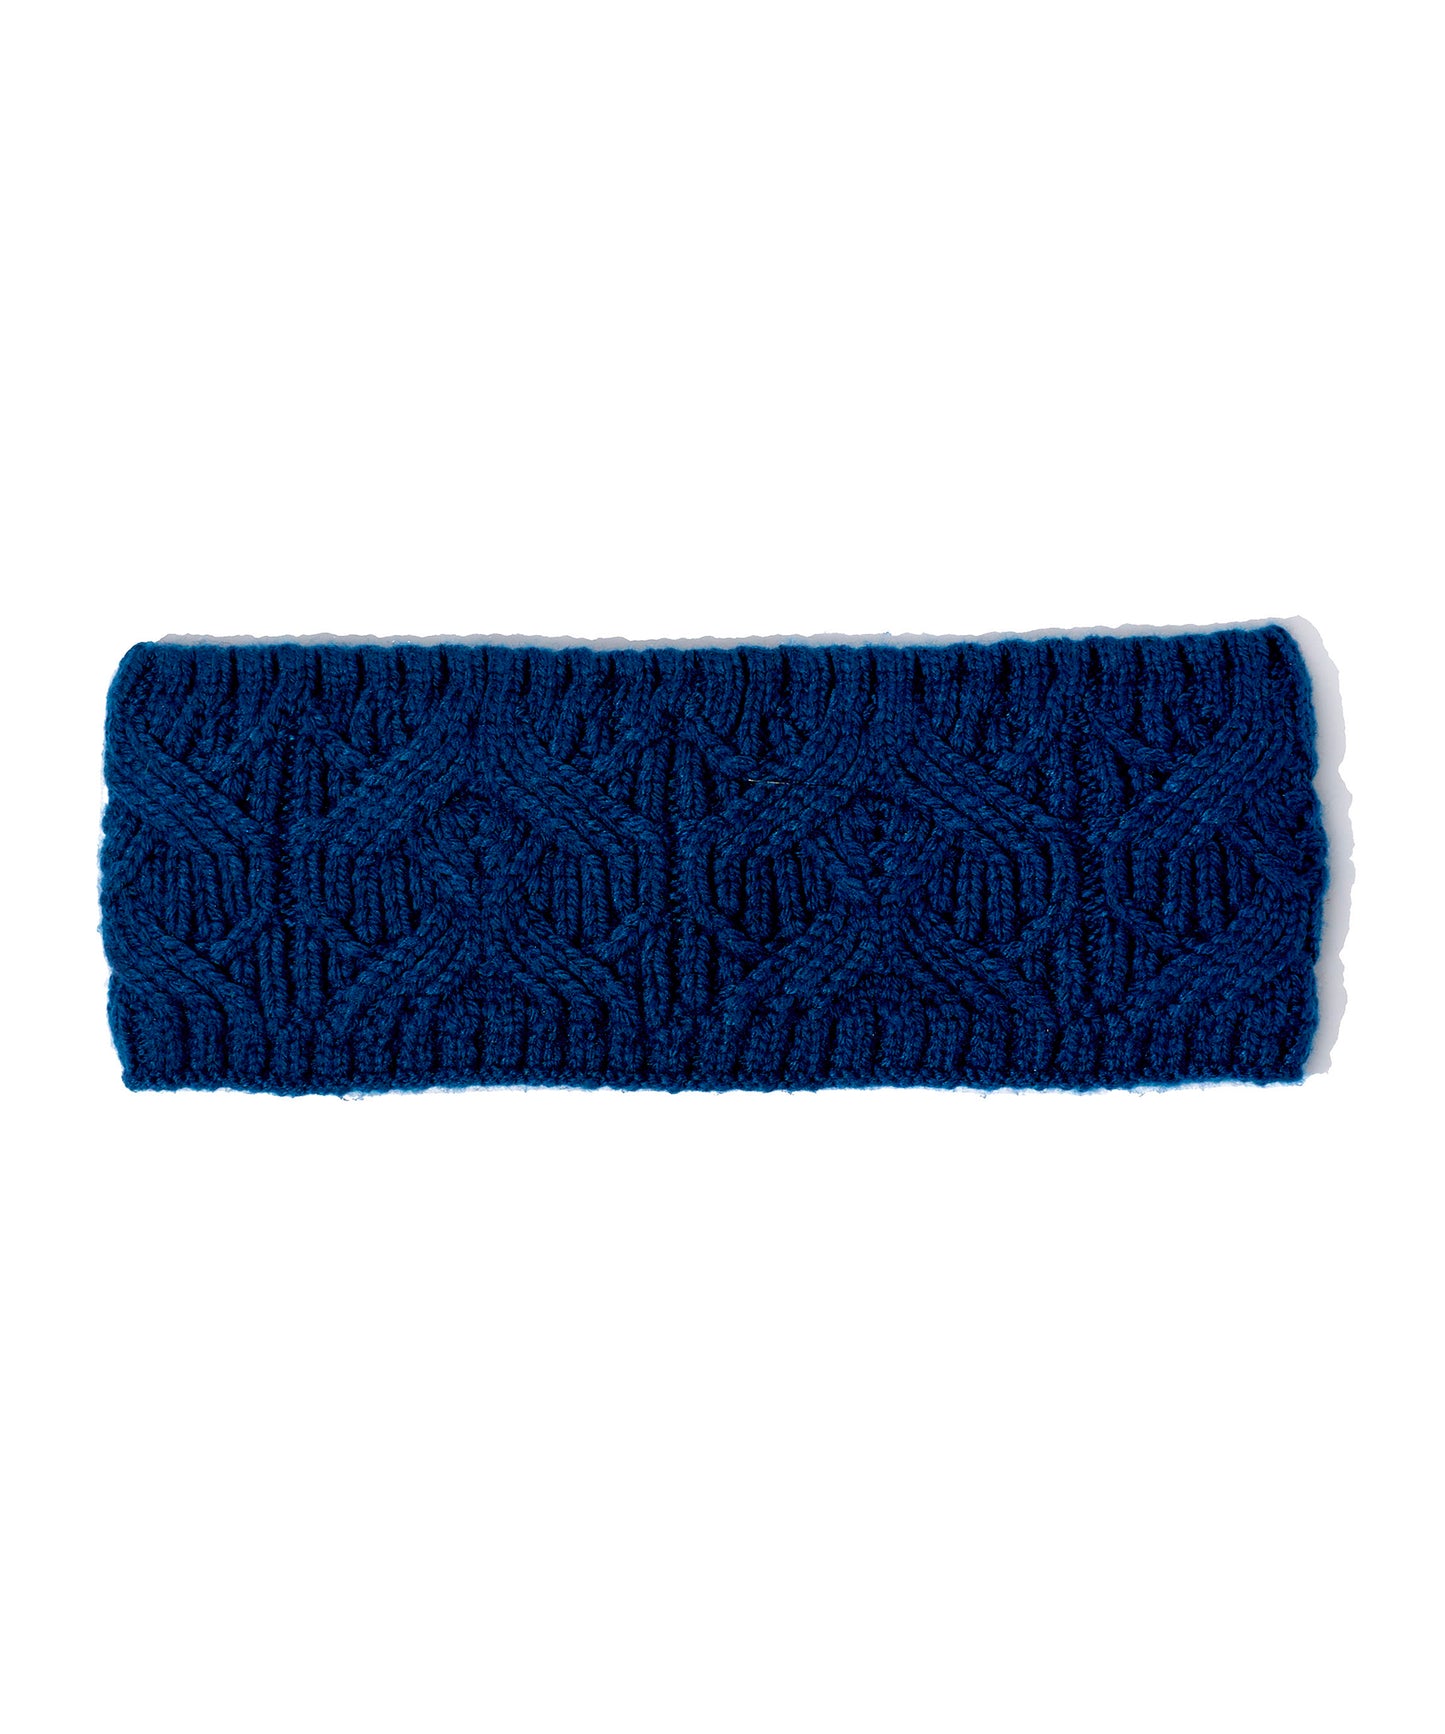 Loopy Cable Headband in color Poseidon